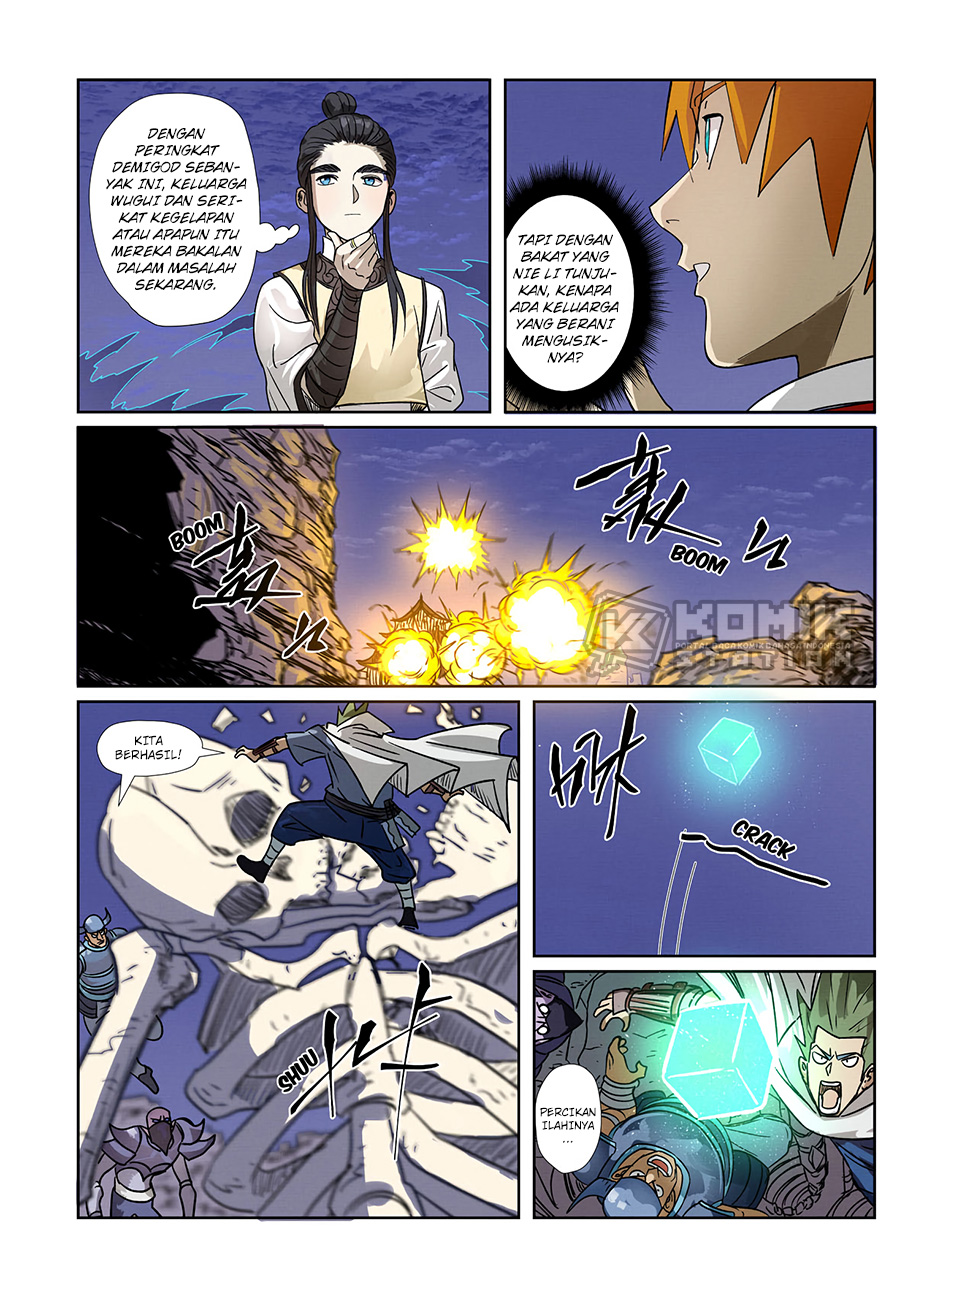 Tales of Demons and Gods  Chapter 272.5